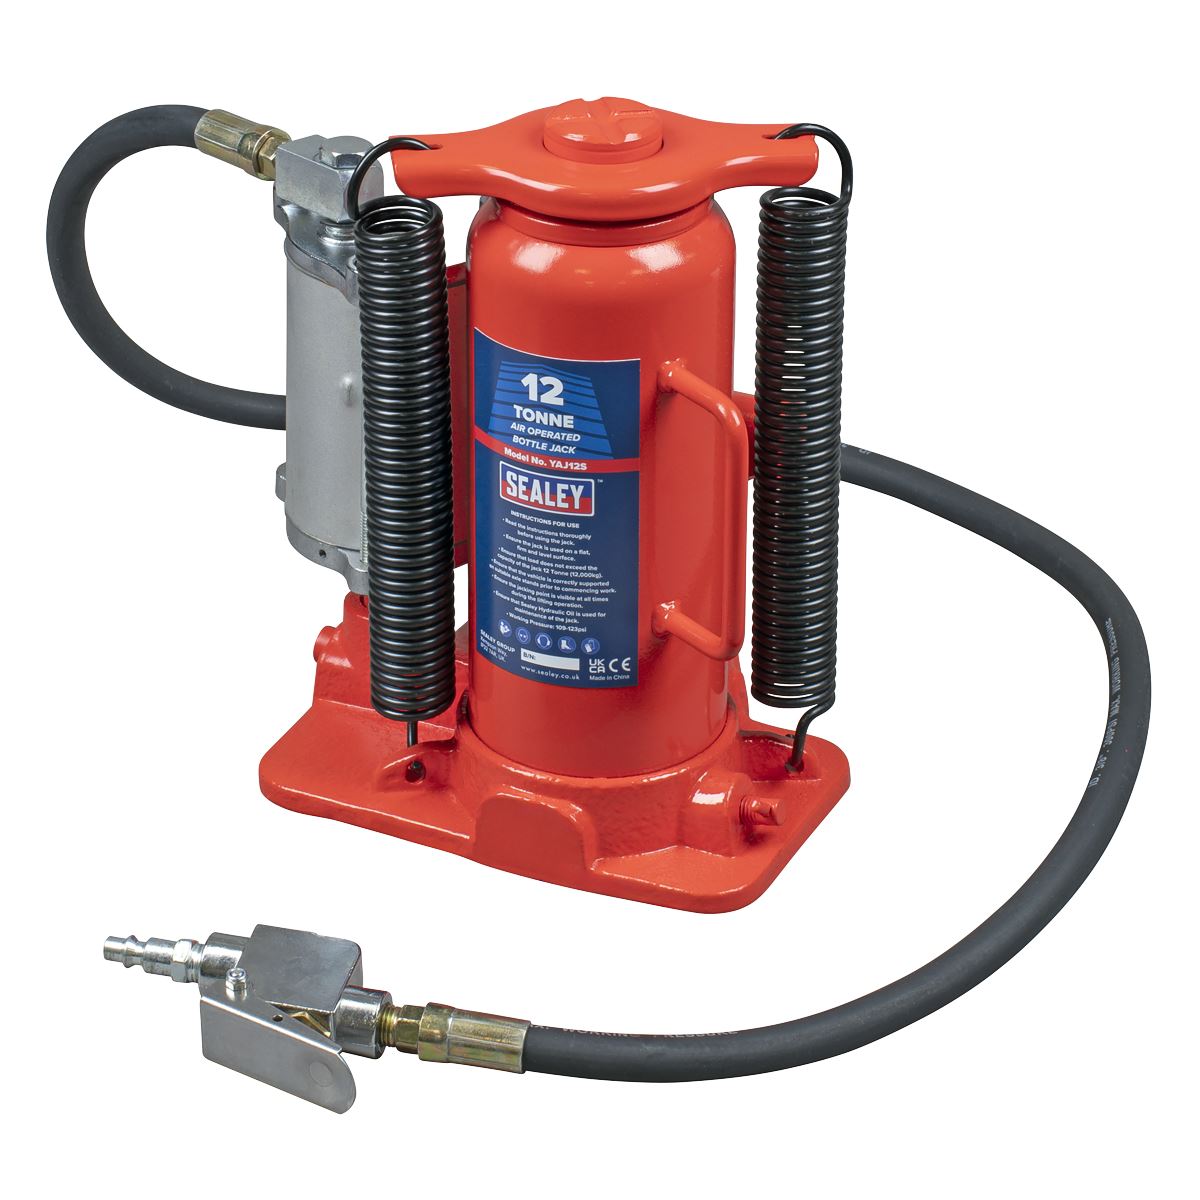 Sealey Air Operated Hydraulic Bottle Jack 12 Tonne